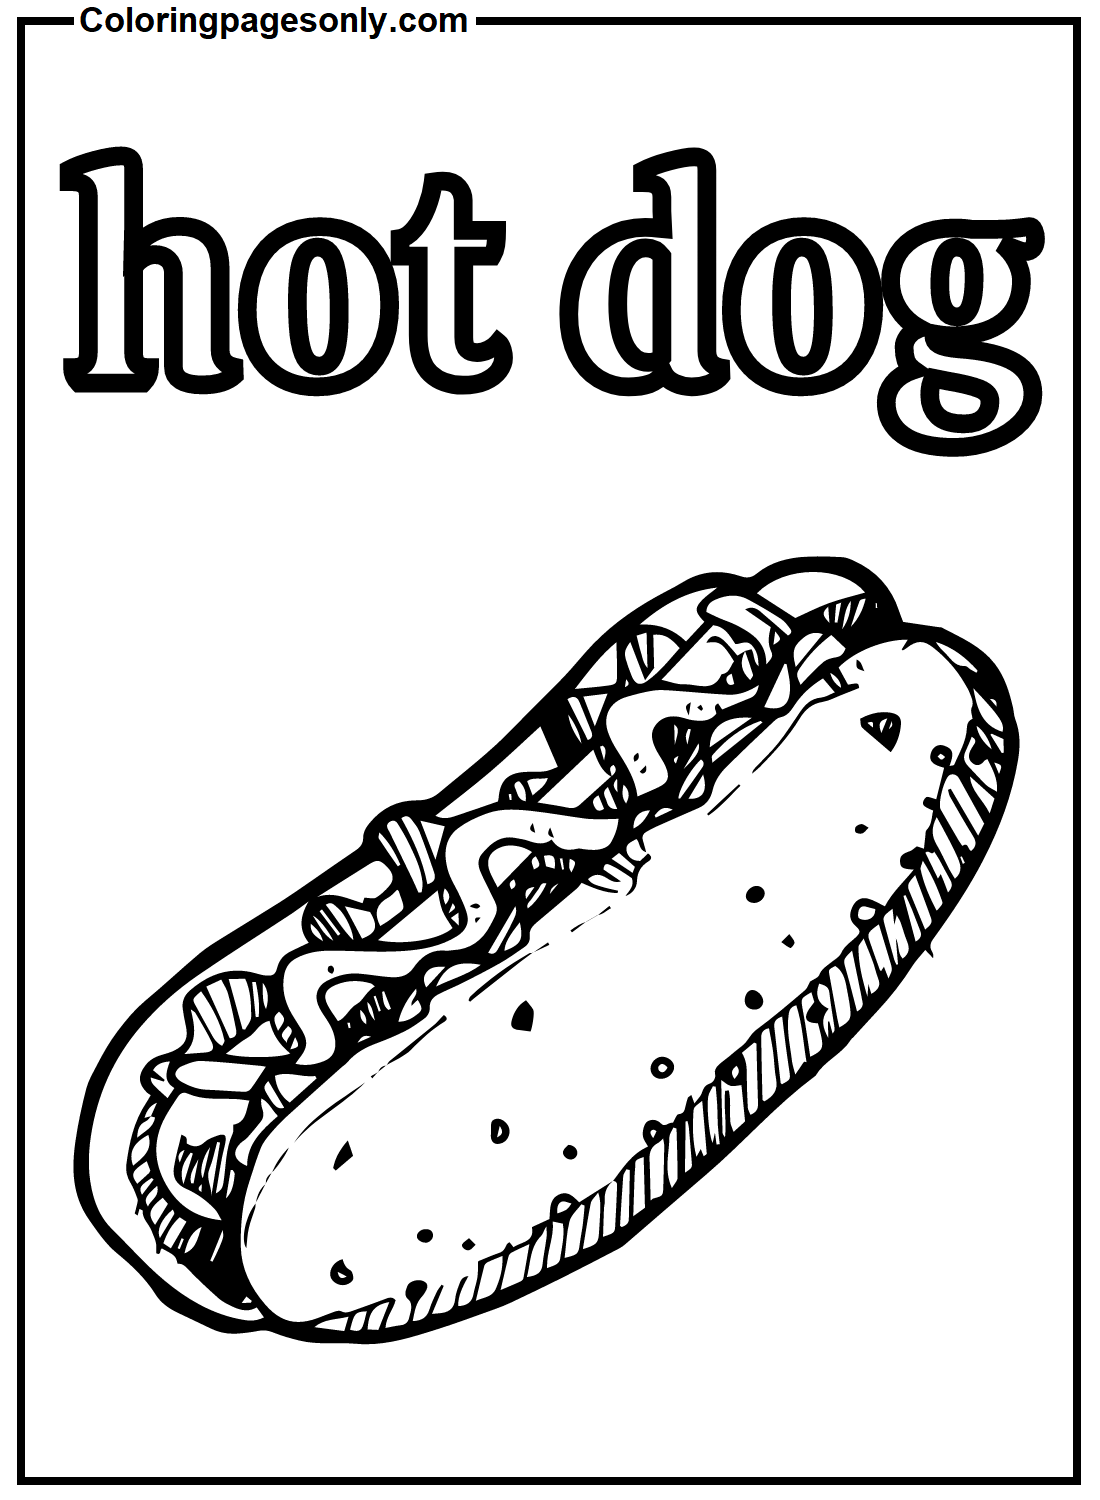 Hot Dog Free Coloring Pages